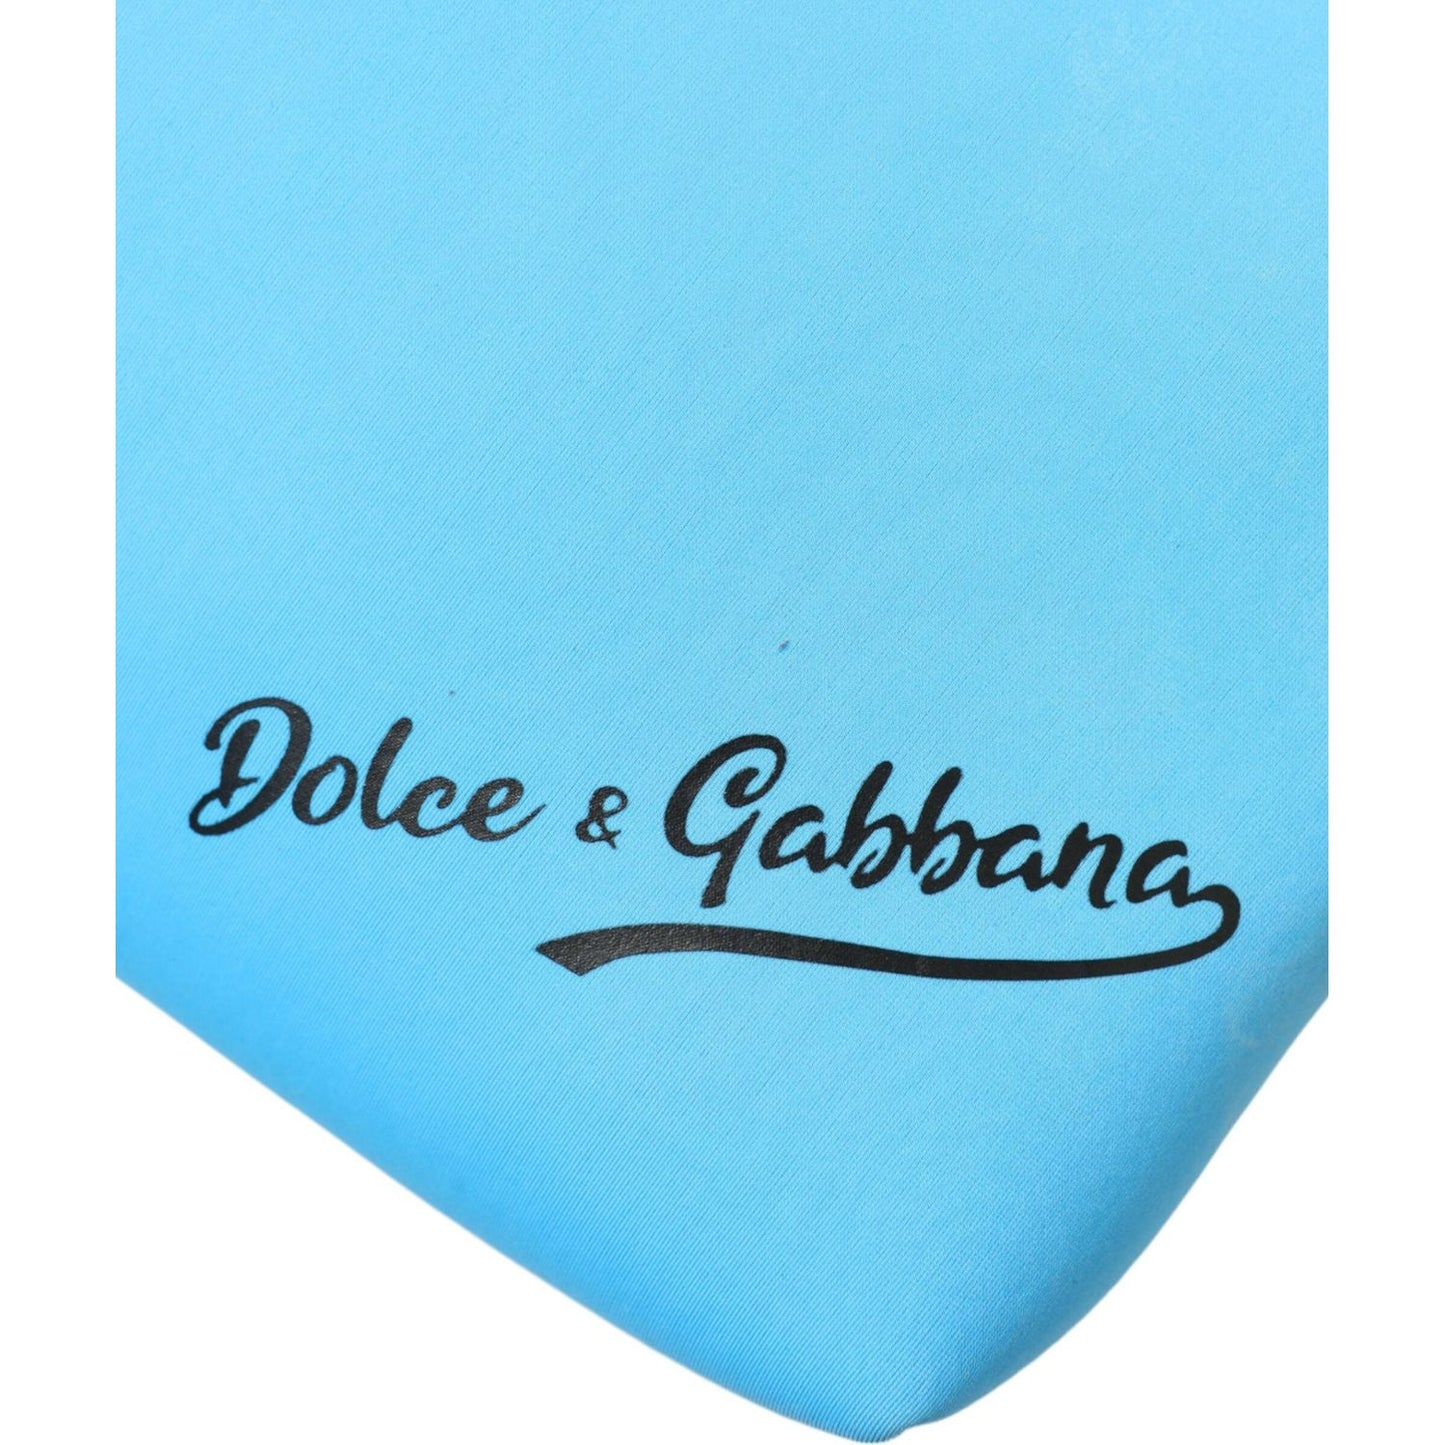 Dolce & Gabbana Elegant Blue Hand Pouch with Strap elegant-blue-hand-pouch-with-strap